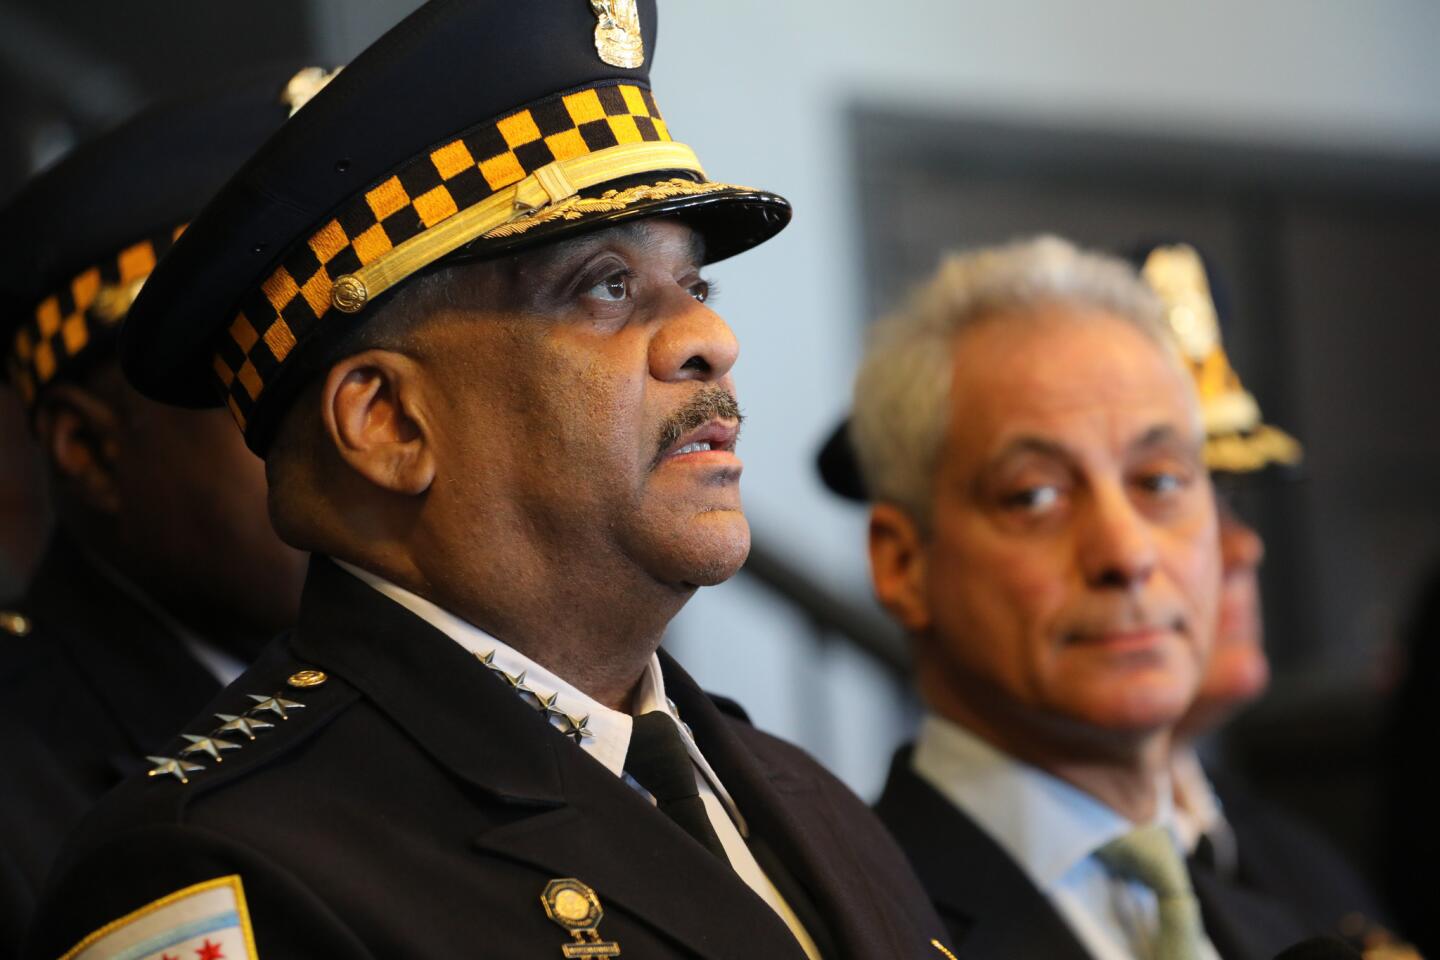 Chicago police Superintendent Eddie Johnson, left, and Chicago Mayor Rahm Emanuel speak during a news conference to react to the dropping of charges against actor Jussie Smollett by the Cook County state's attorney's office on March 26, 2019.